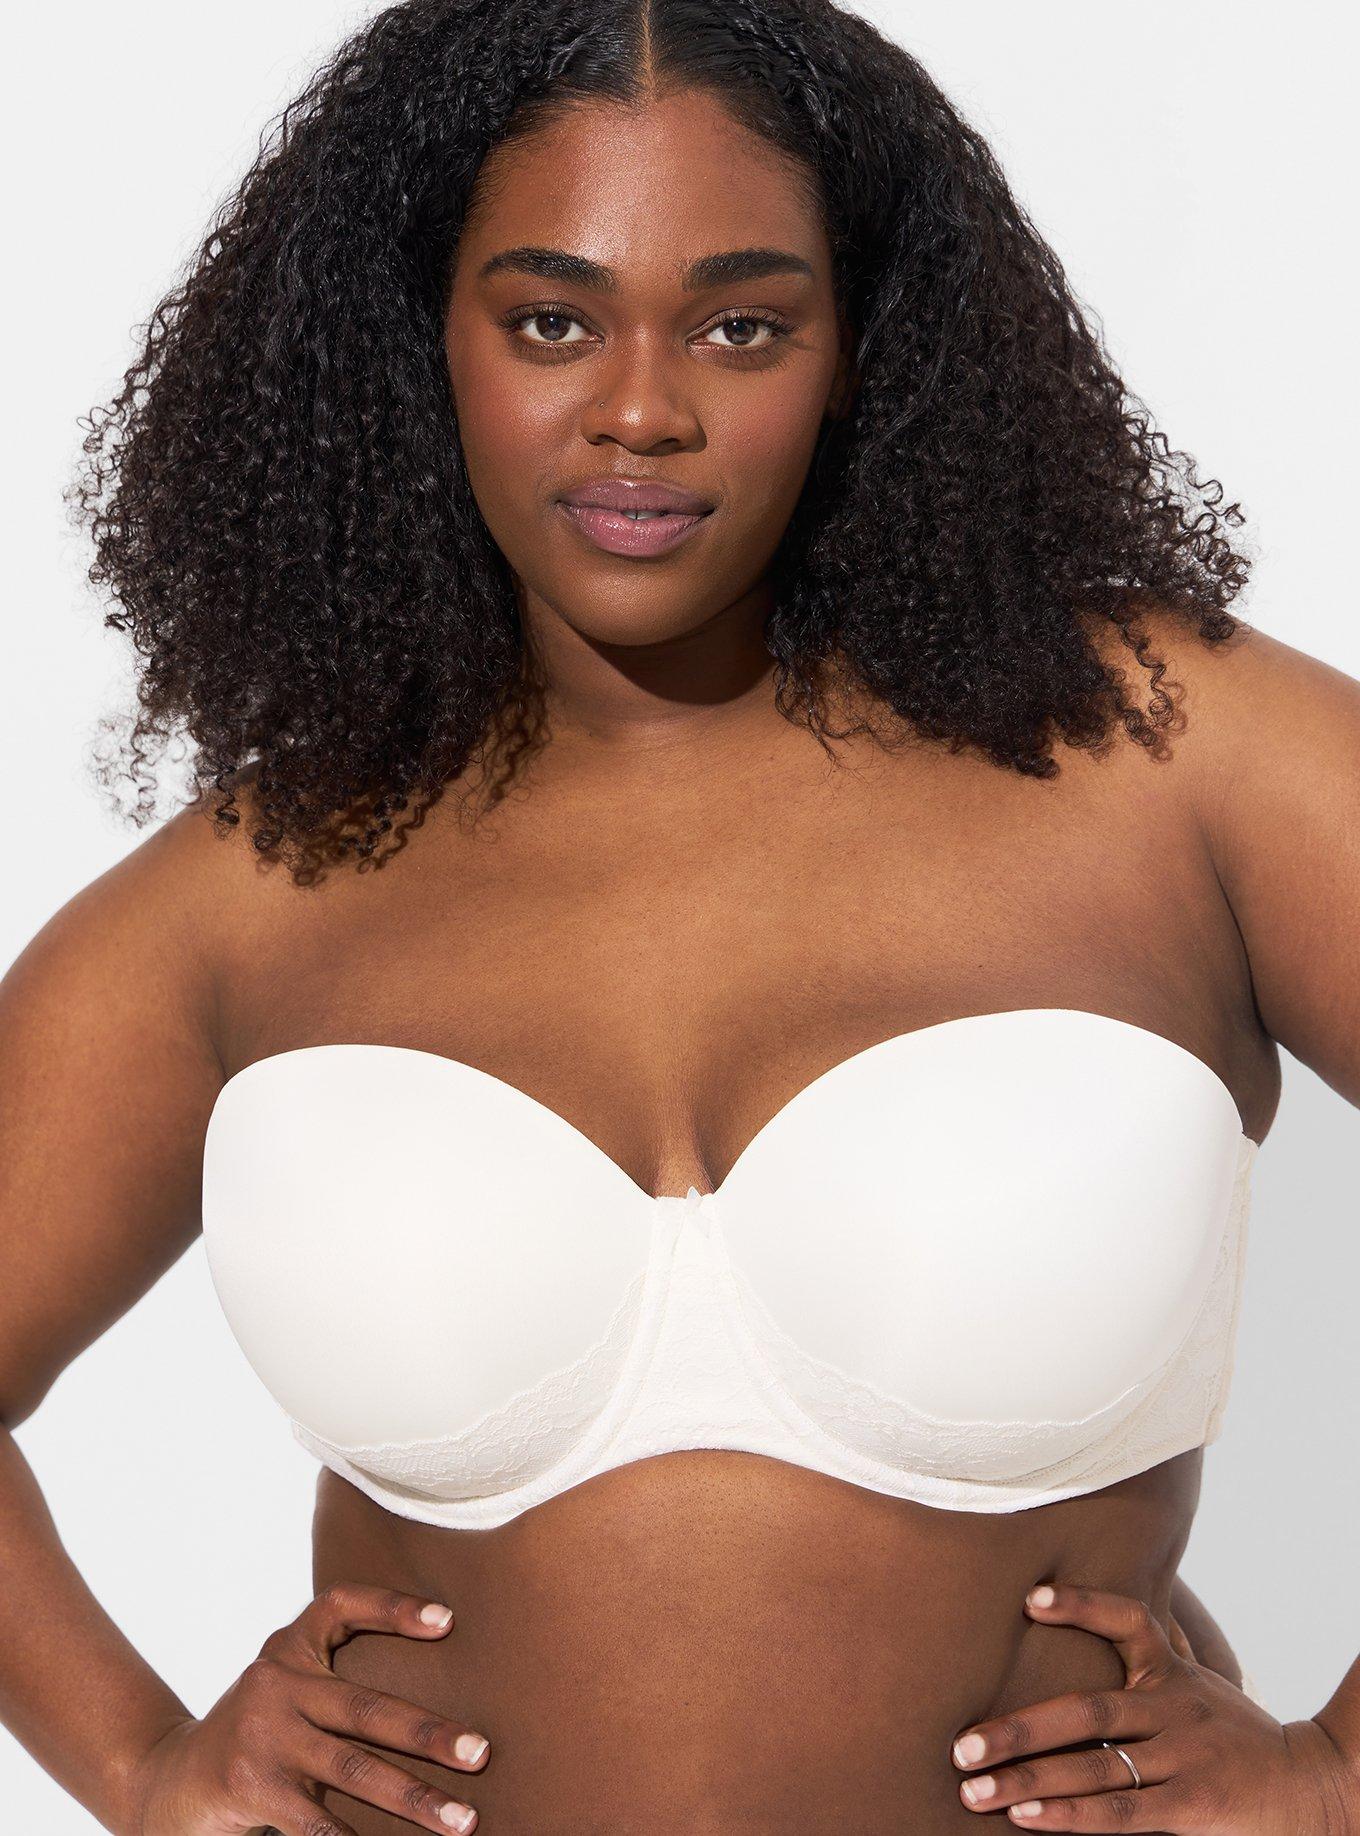 Mechanic crawl equilibrium plus size strapless bra with support